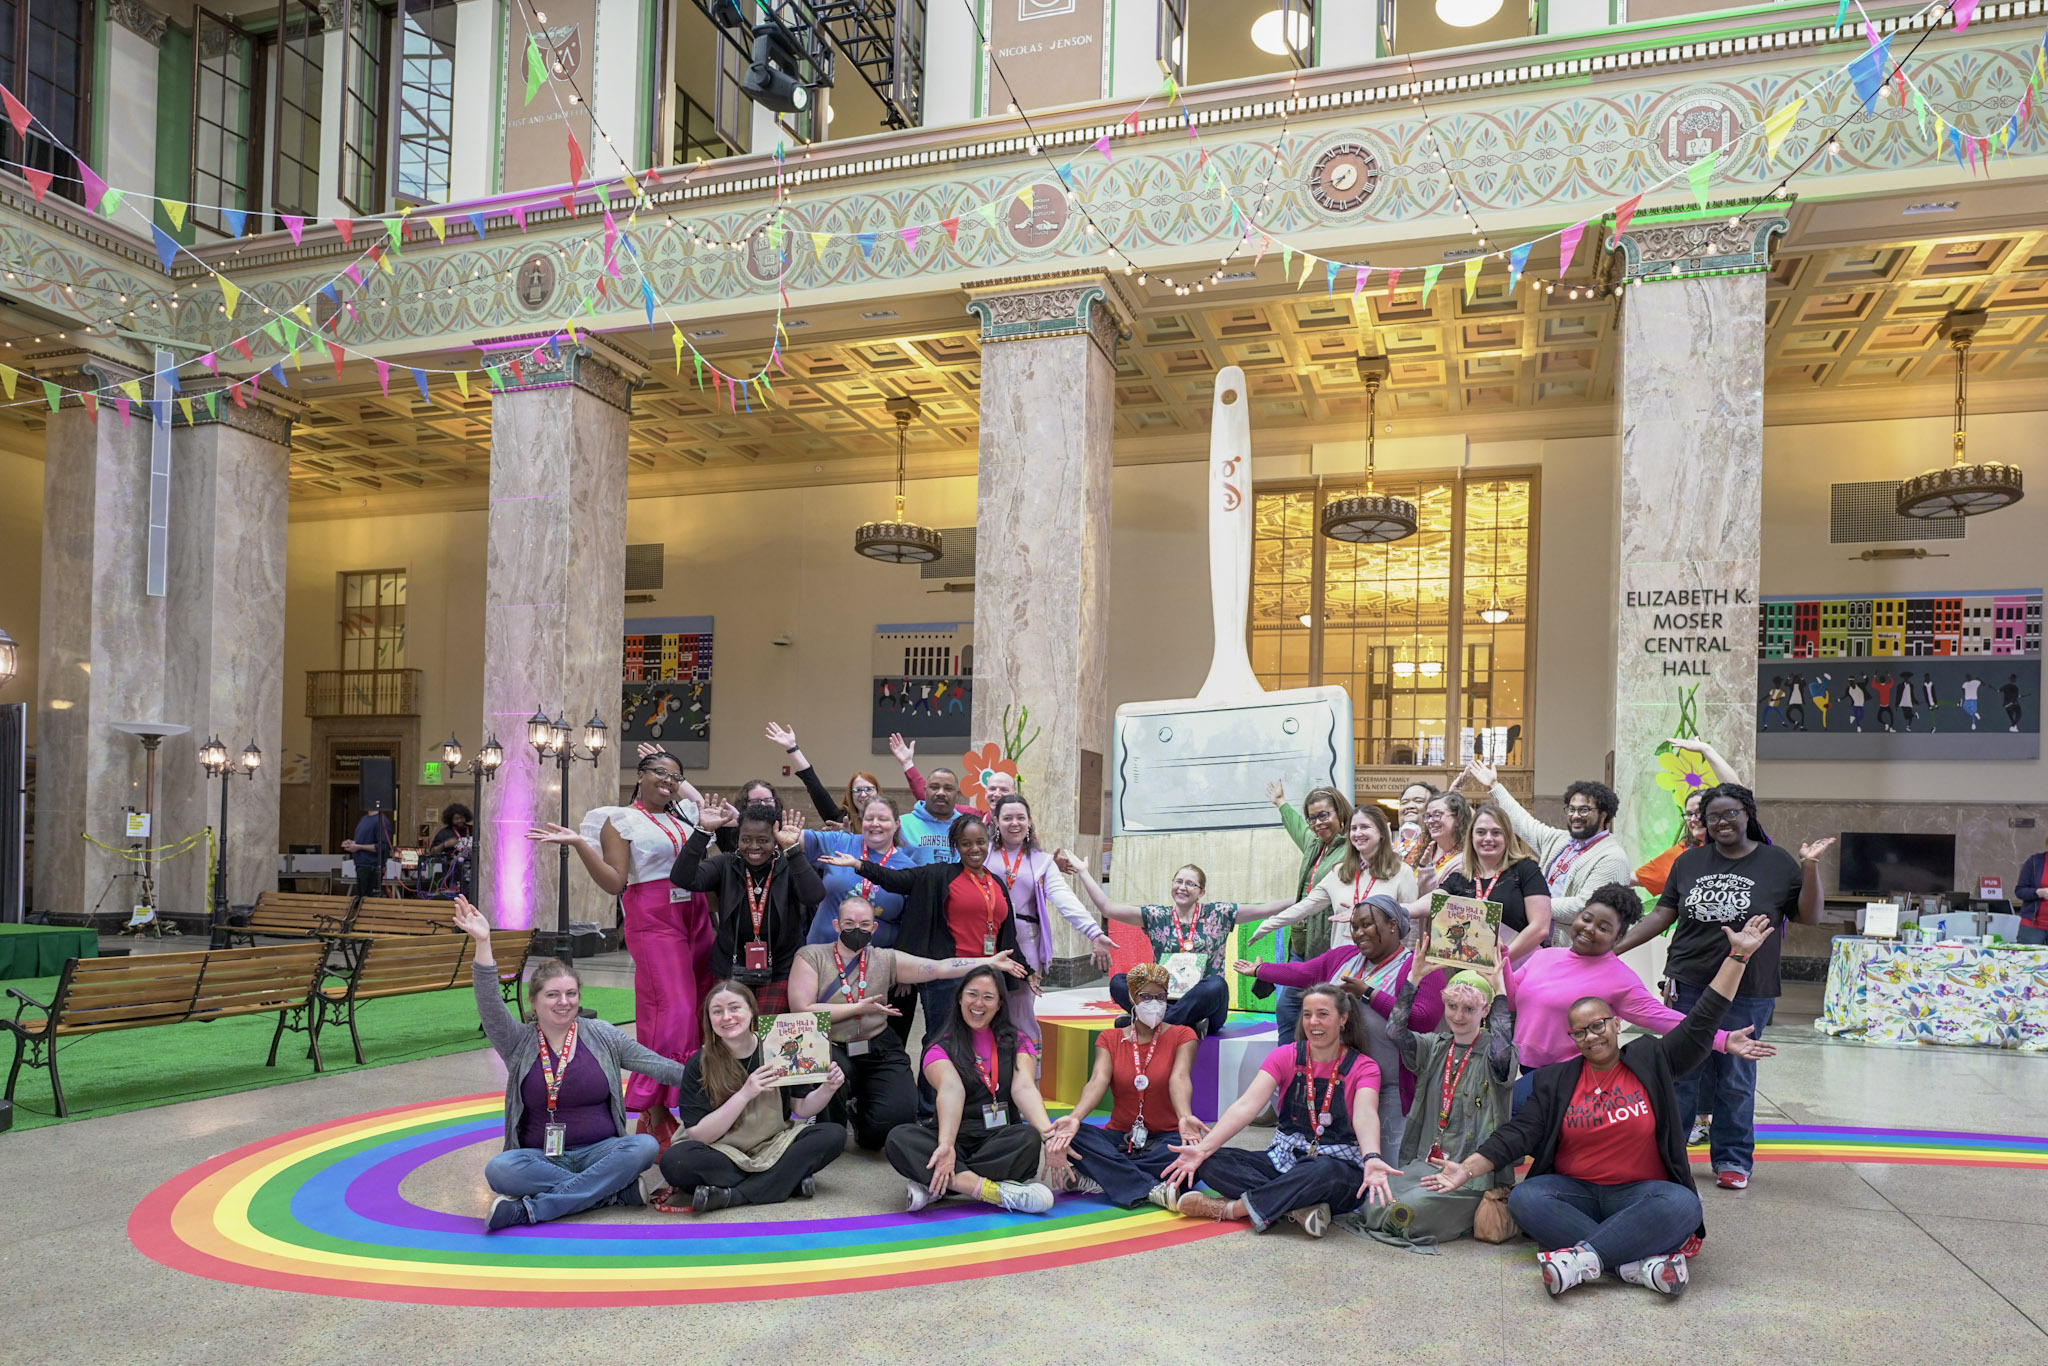 Staff in Central Hall with rainbow paintbrush for the Imagination Celebration